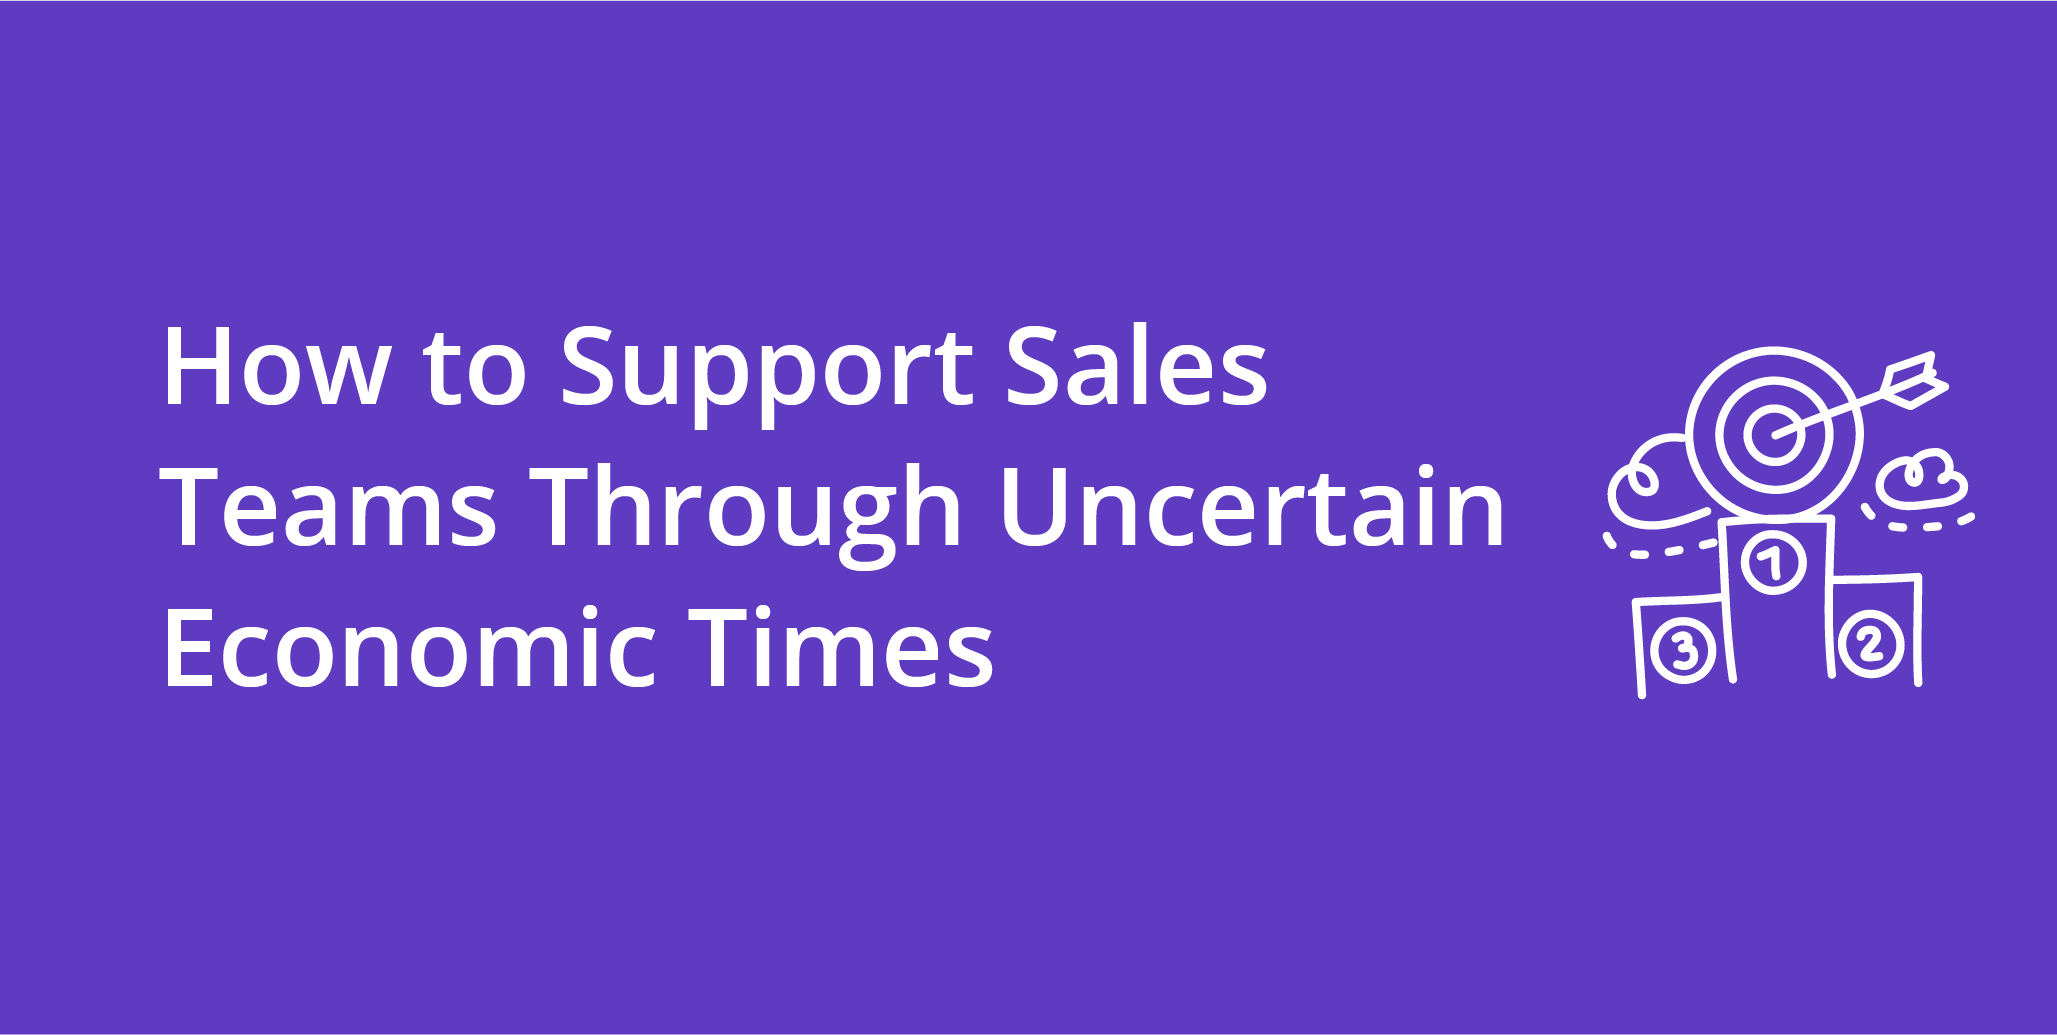 How to Support Sales Teams Through Uncertain Economic Times | Telephones for business